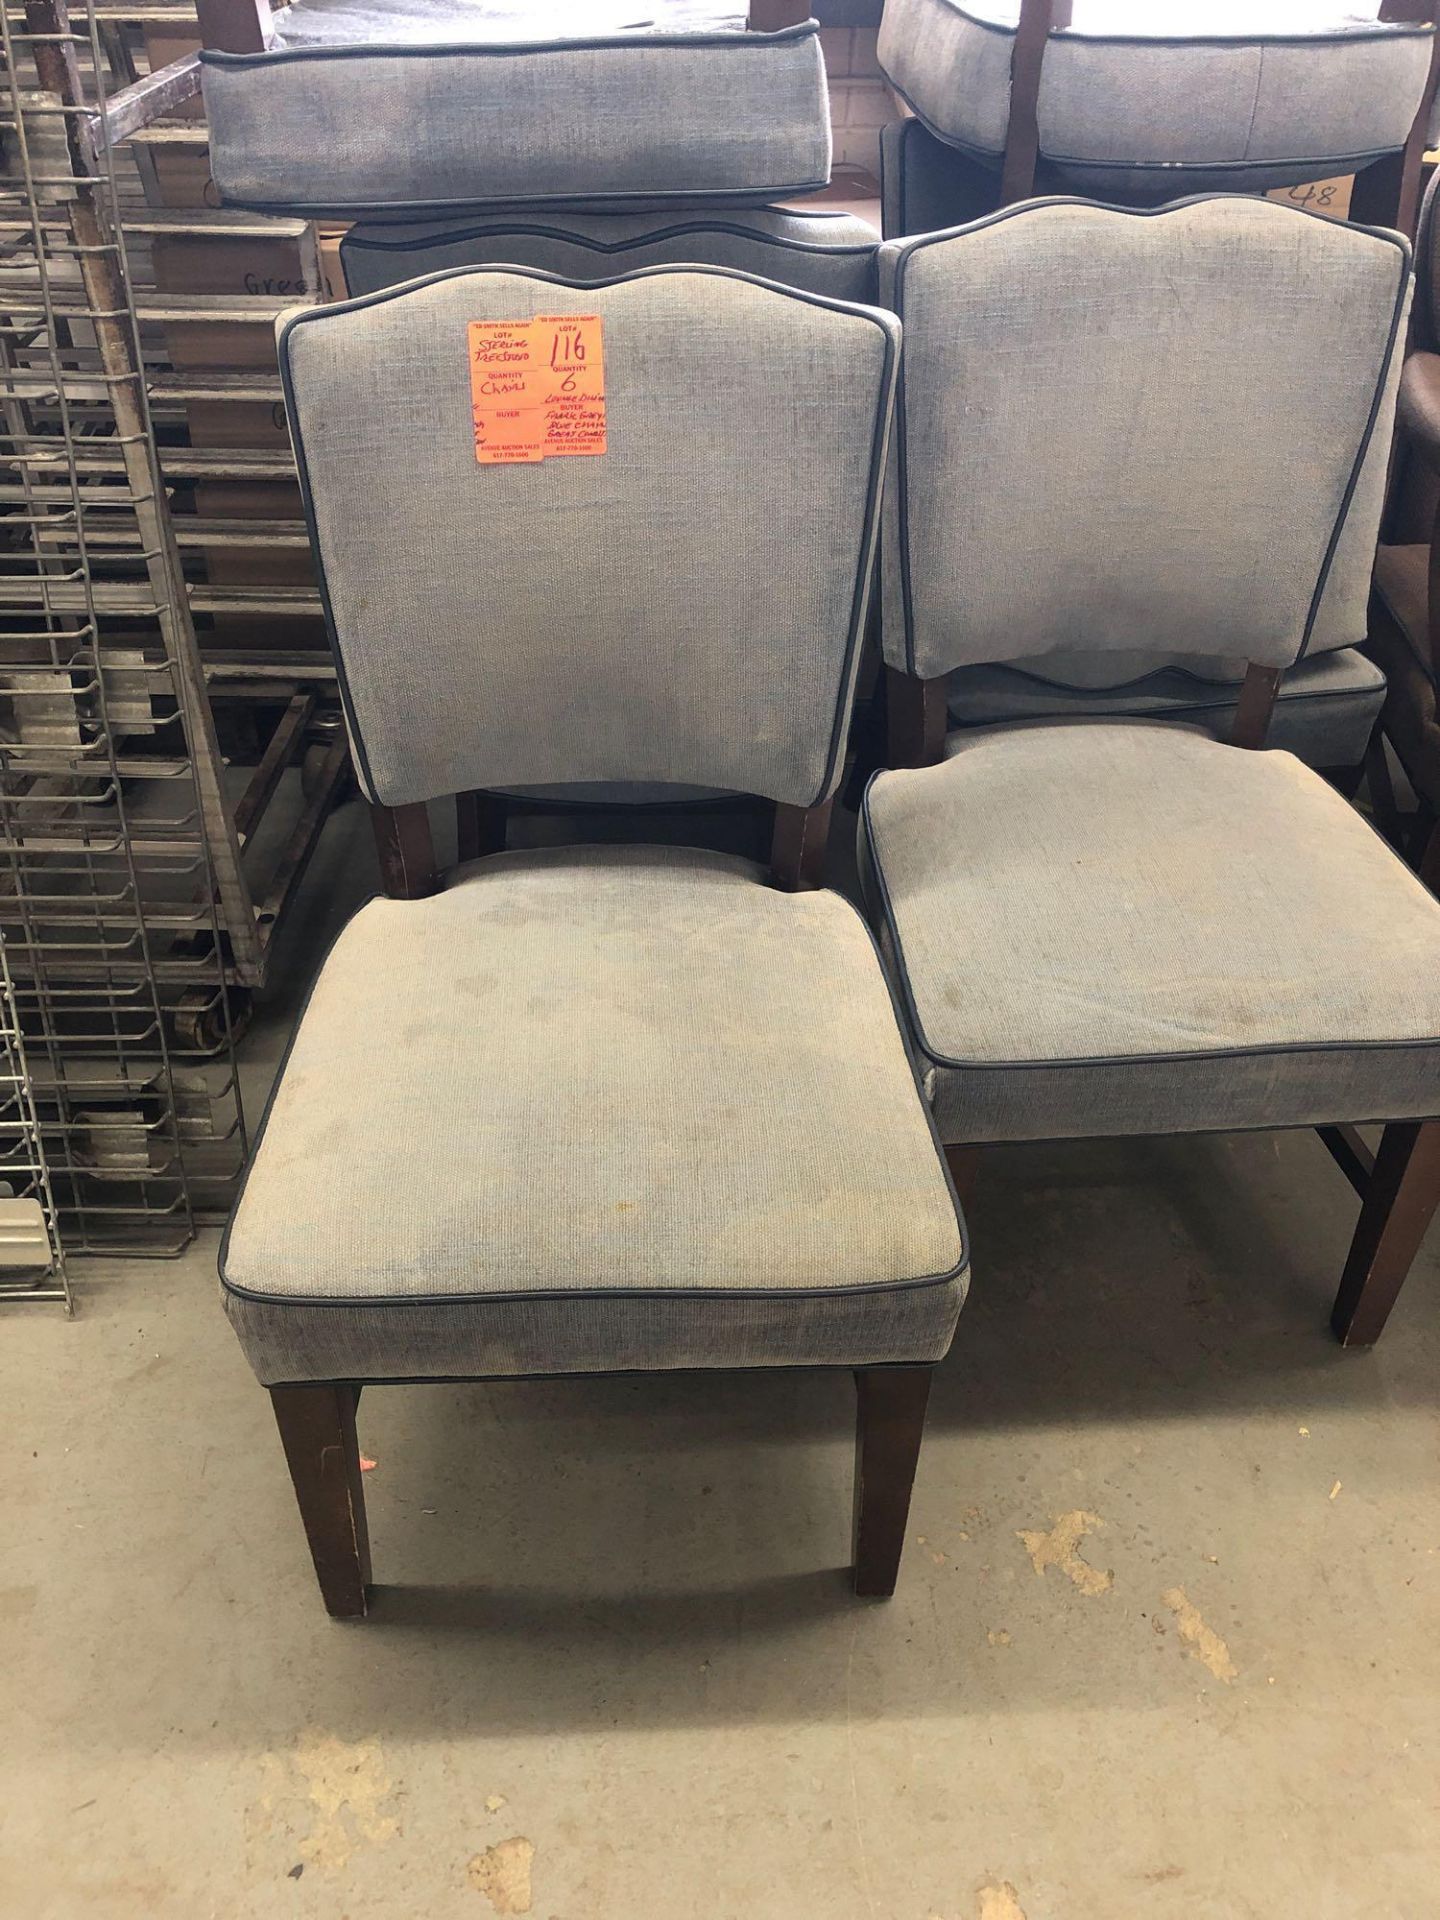 Wood chair with blue gray fabric seat and back